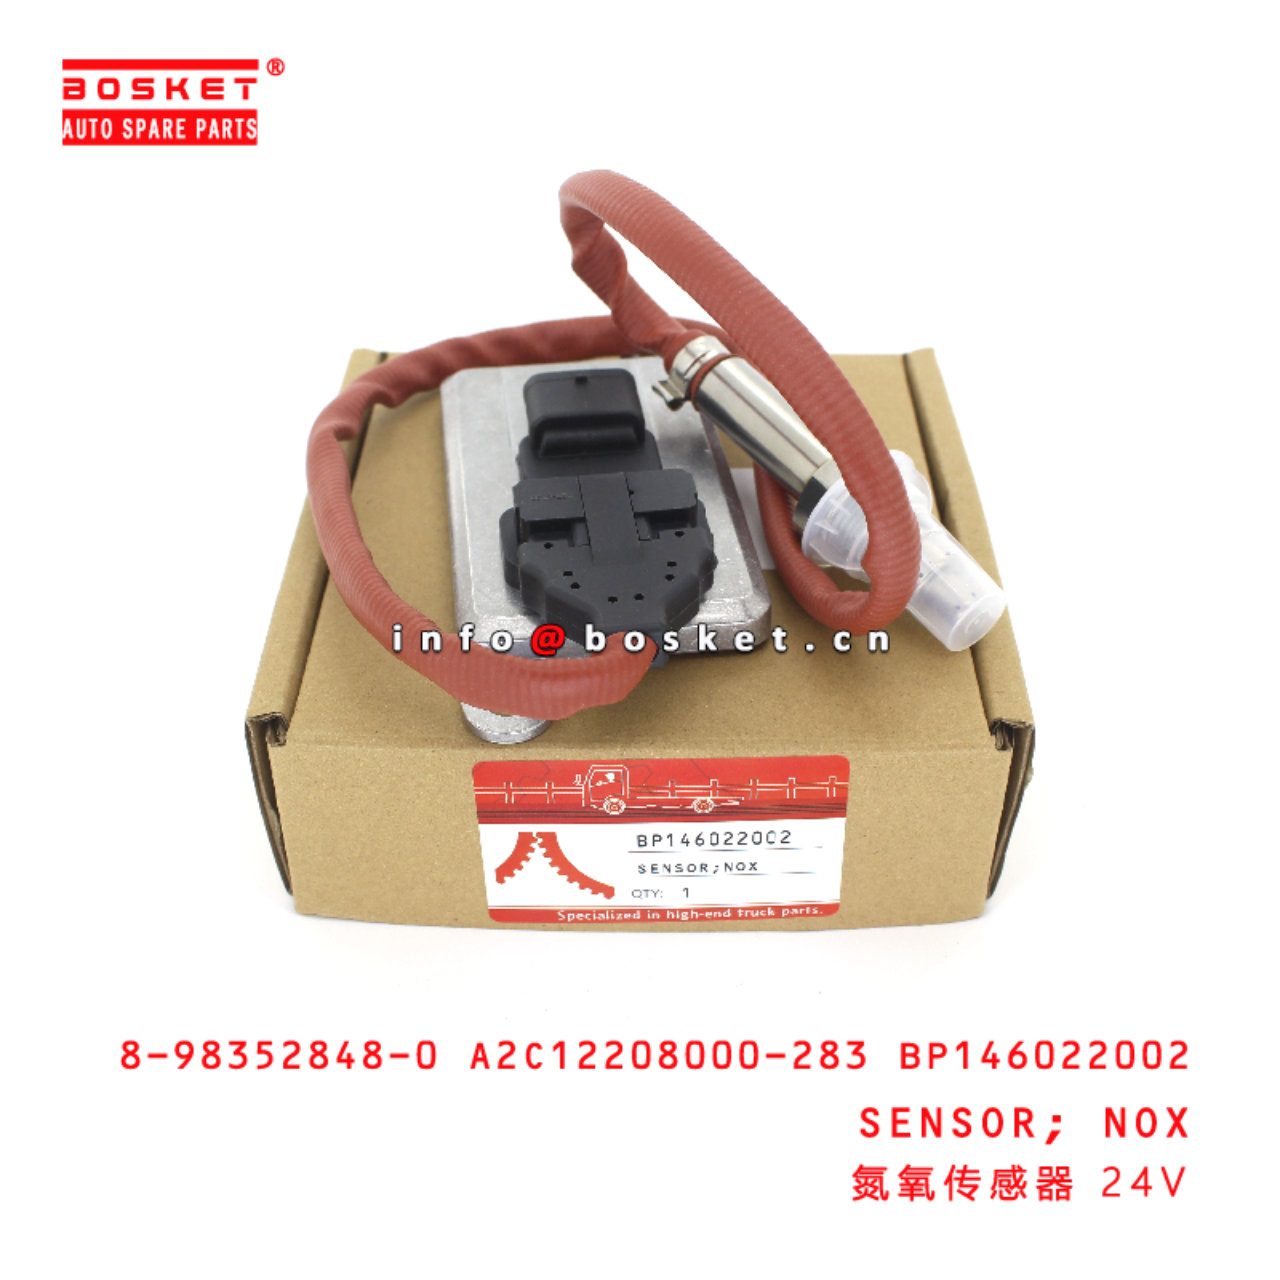 8-98240994-2 Shift Control Box Assembly 8982409942 Suitable for 